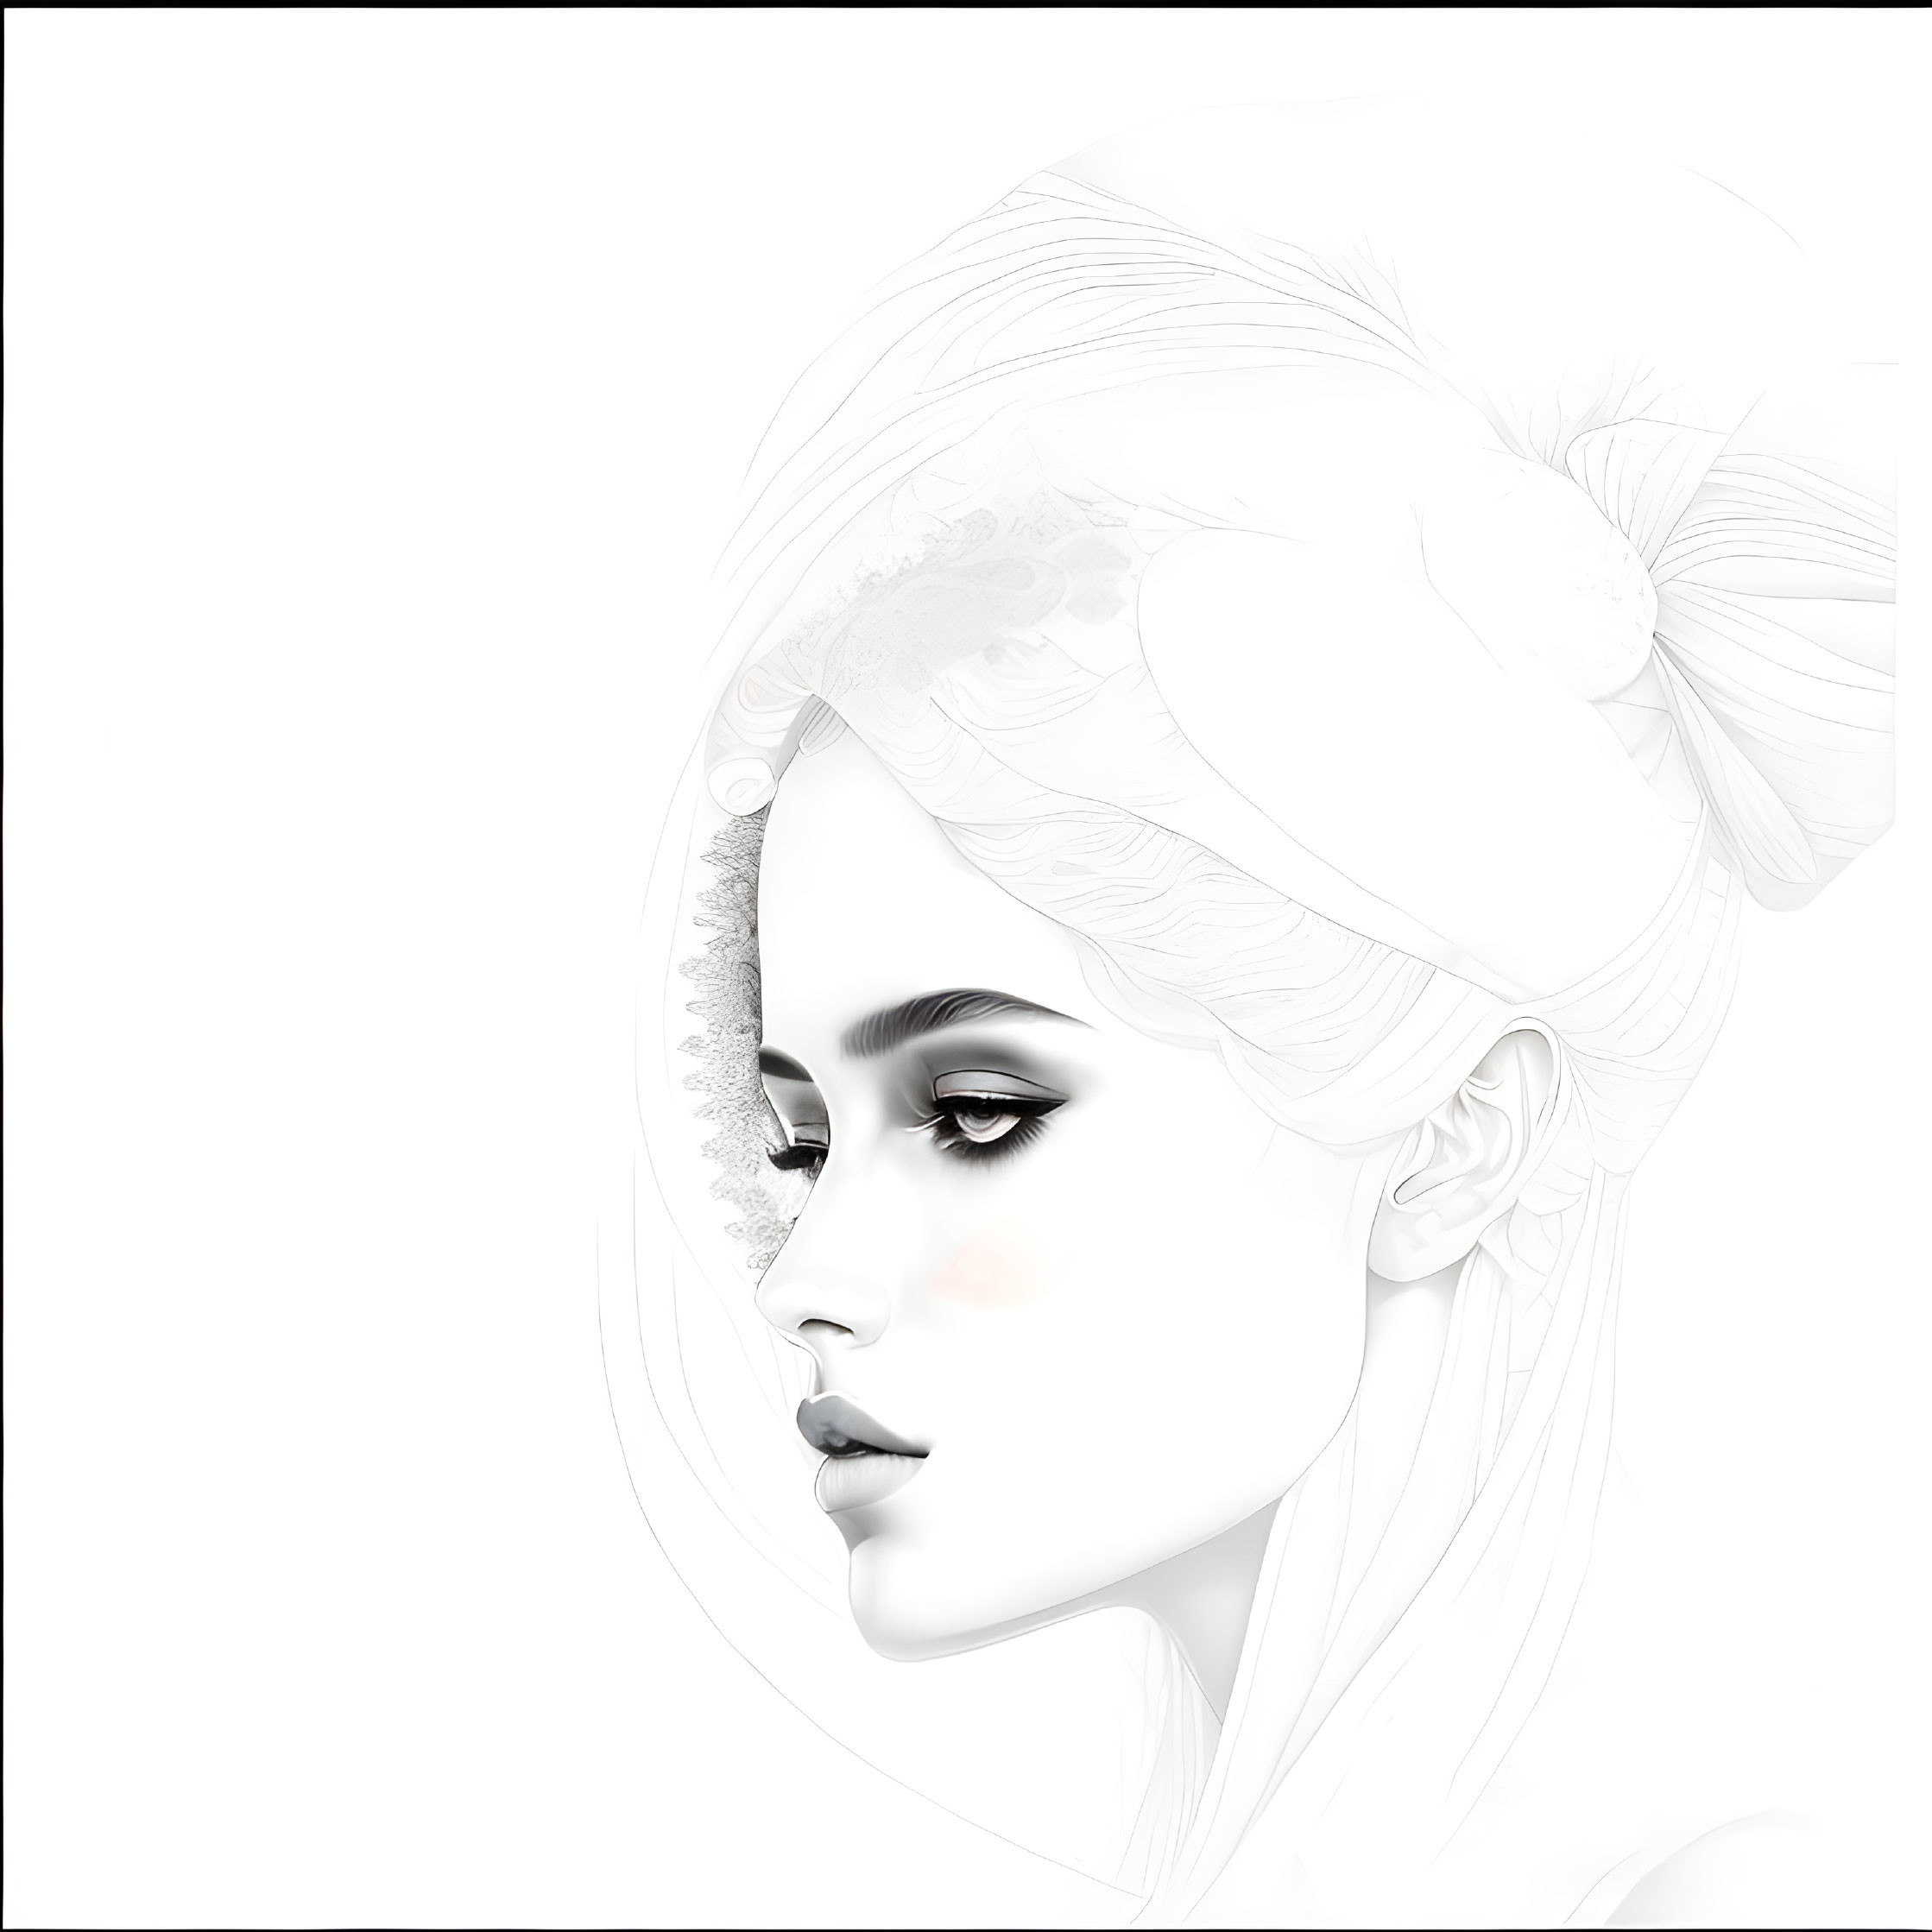 Grayscale illustration of a woman with high cheekbones and sophisticated hair updo